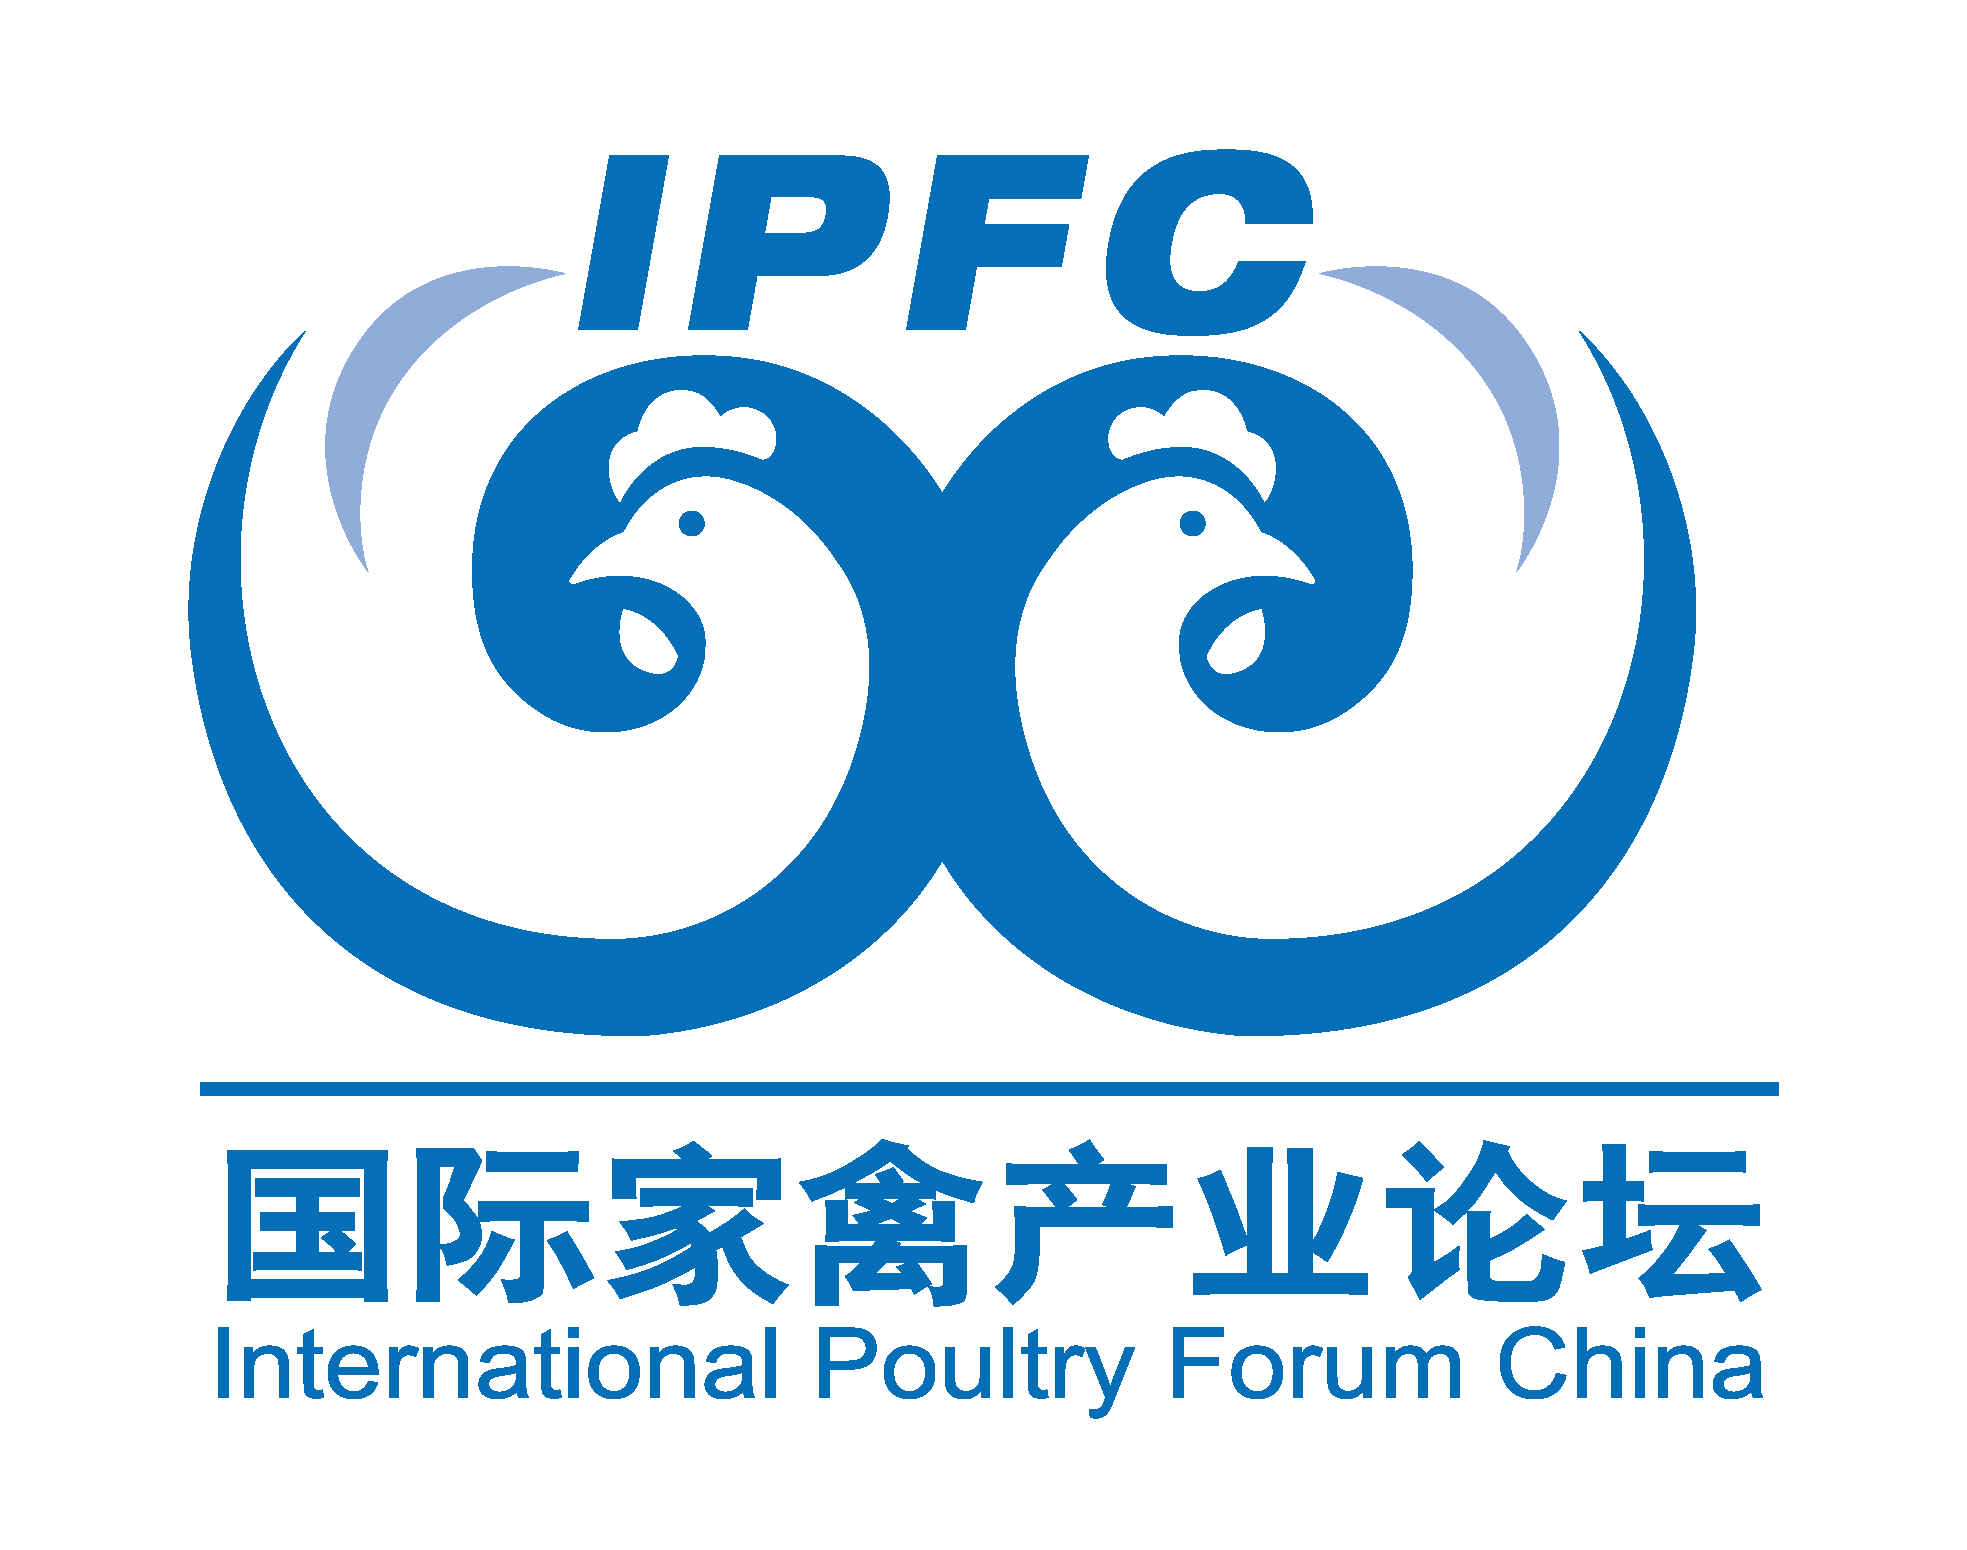 International Poultry Forum China